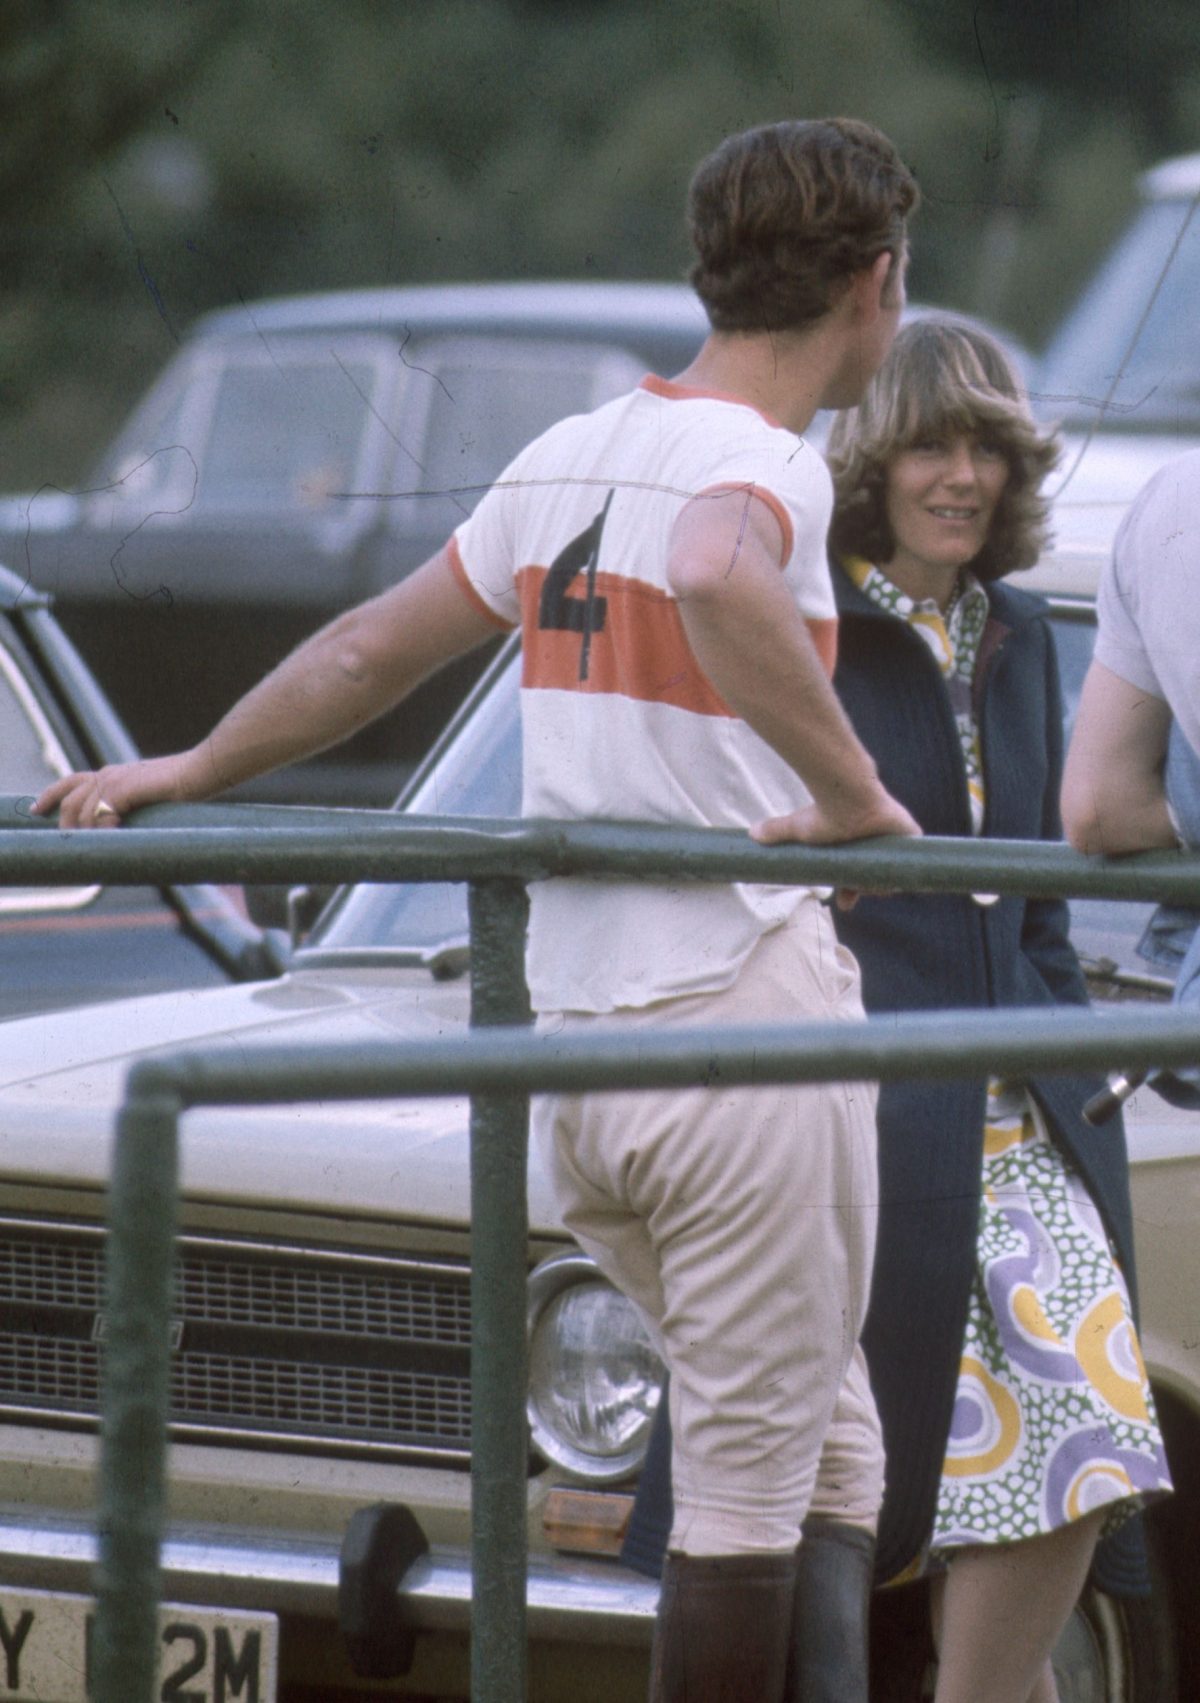 Then-Prince Charles and Camilla Parker Bowles speaking after a polo match (circa 1972)